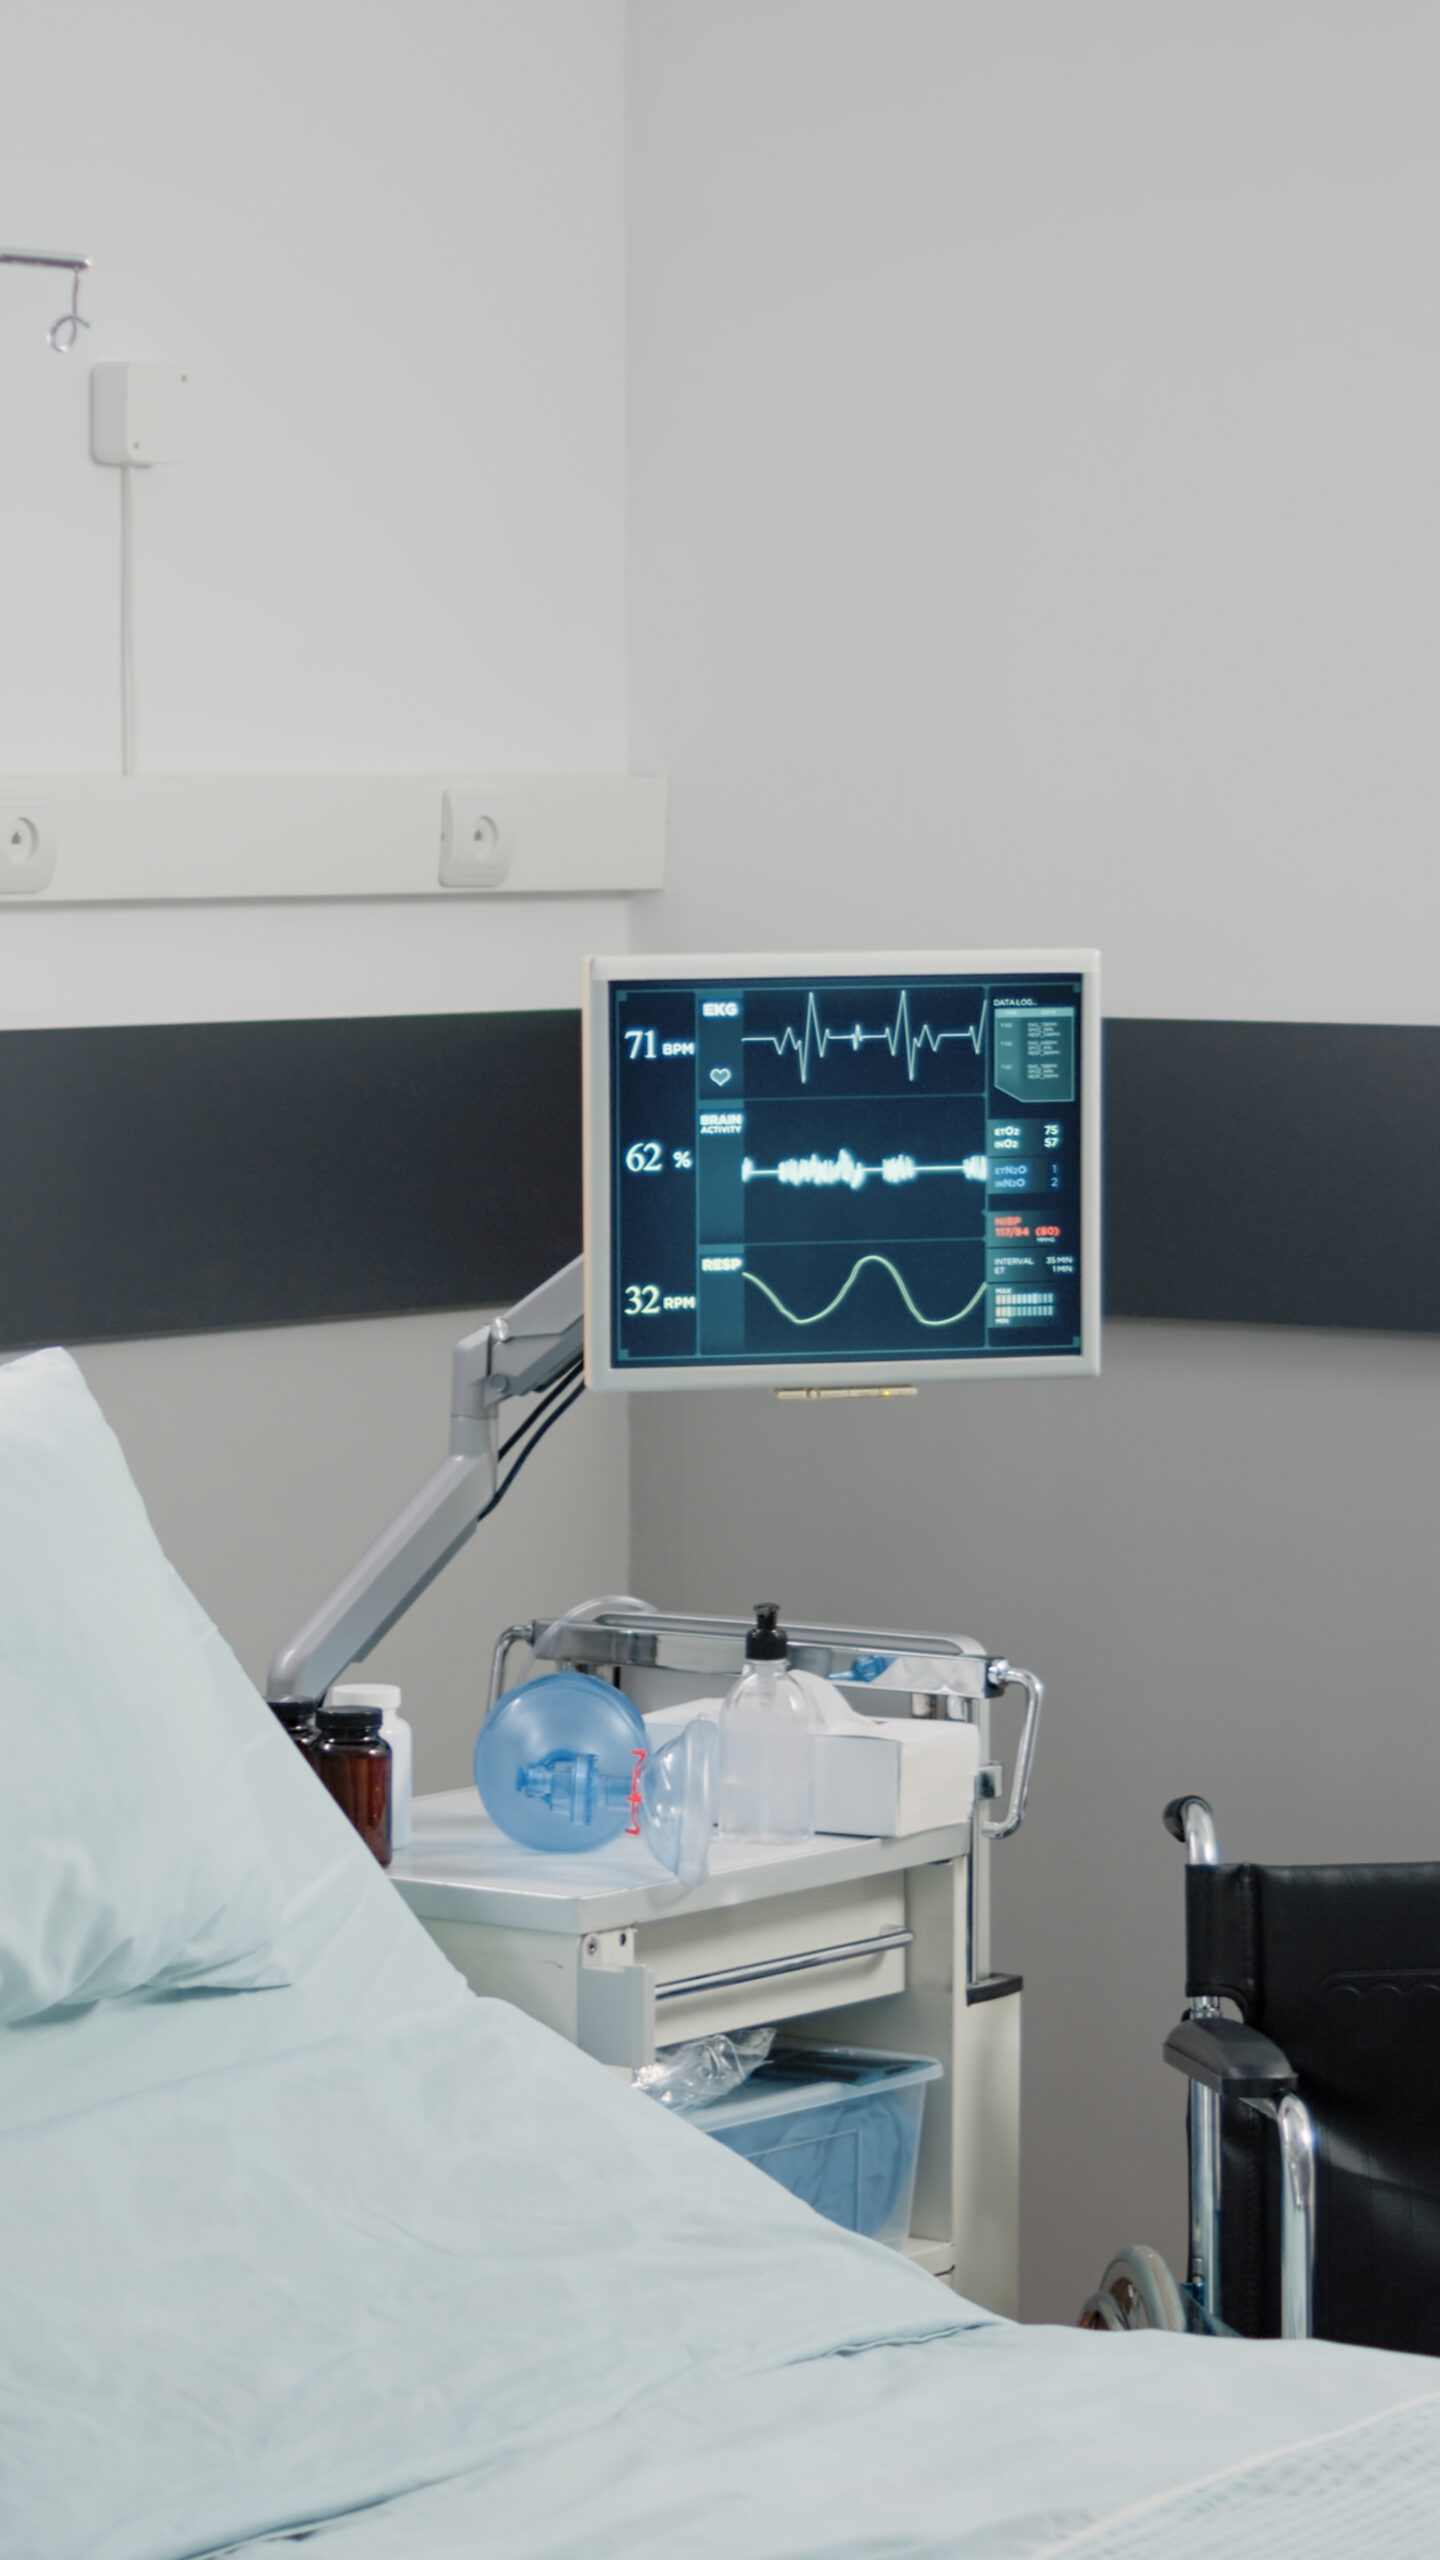 Nobody in hospital ward with bed and heart rate monitor for reanimation and healthcare. Empty emergency room with medical instruments and equipment for intensive care. Space for recovery